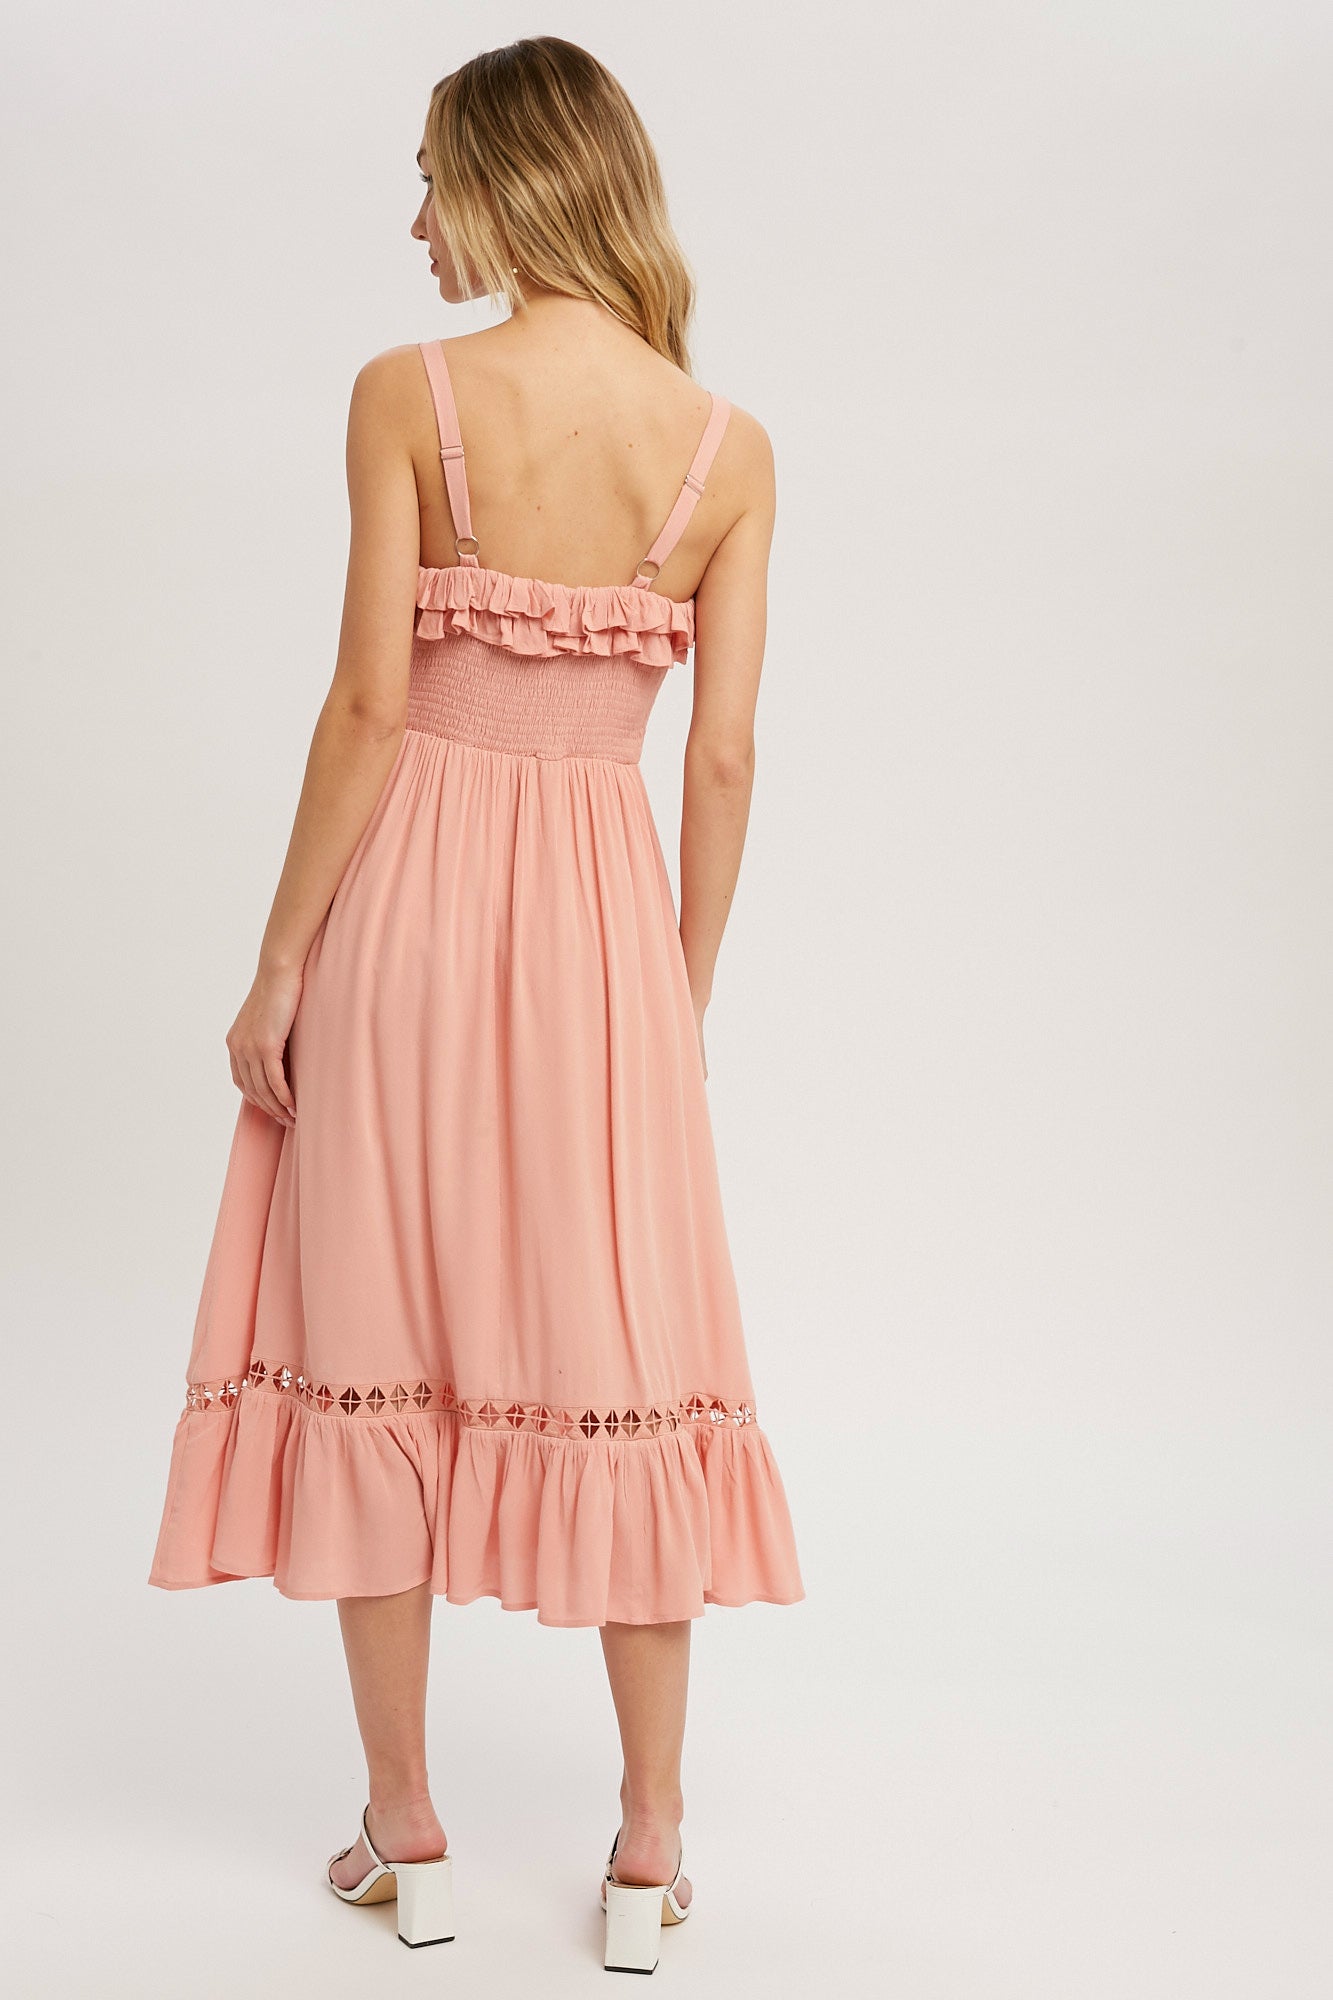 Midi Dress in Rose Color with Smocking